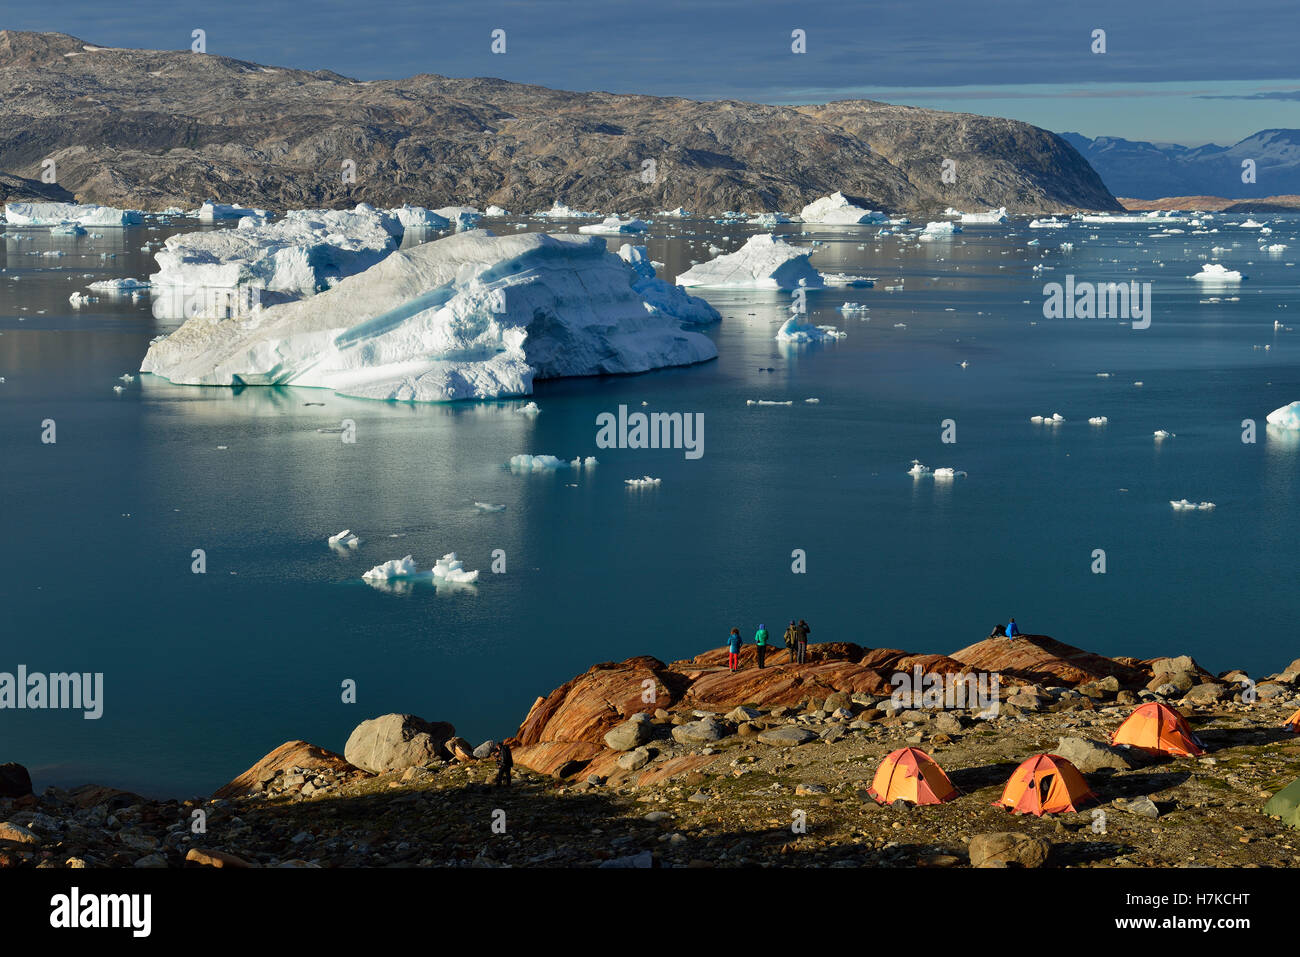 Tourist camp with tents, Johan Petersen Fjord, East Greenland, Greenland Stock Photo